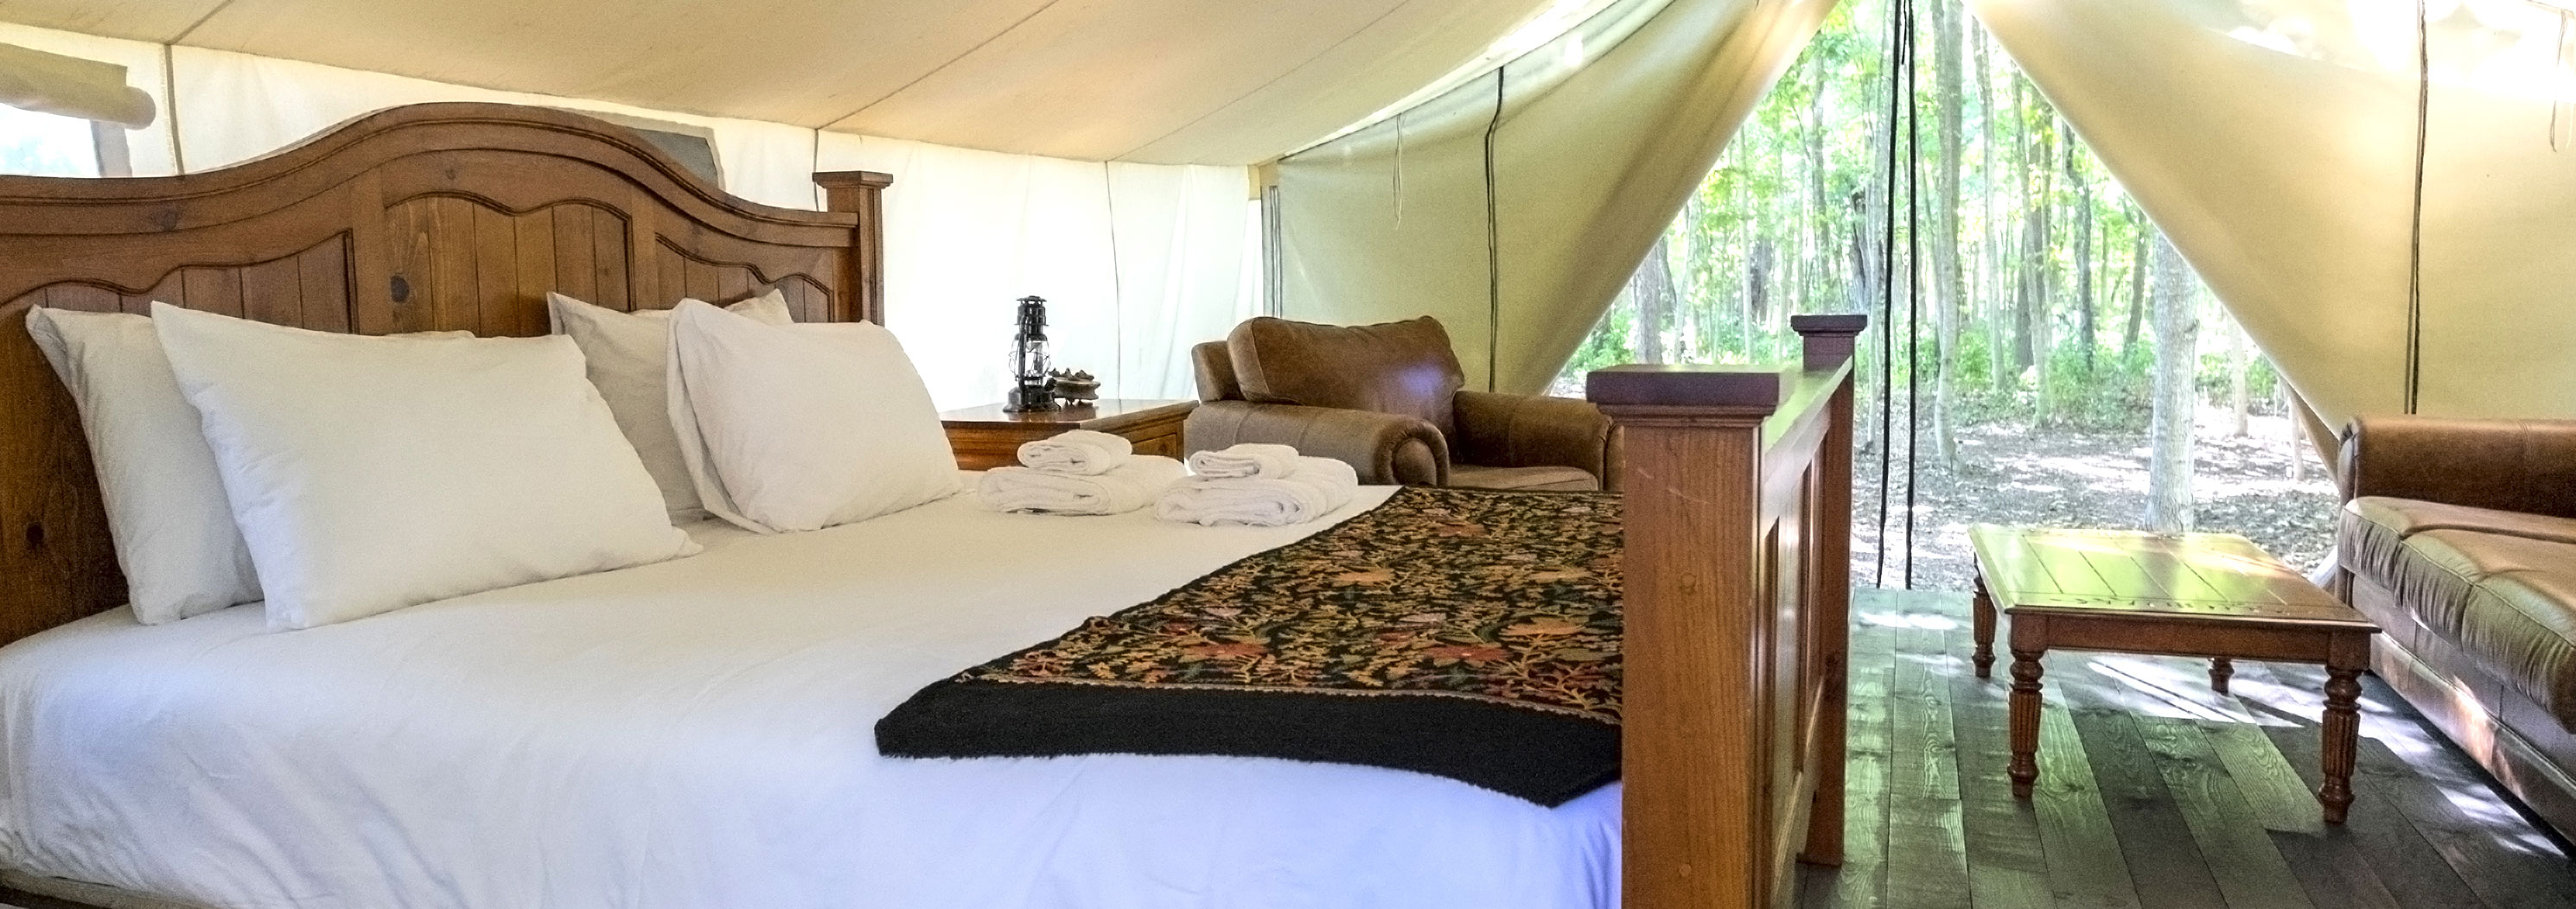 Luxurious furniture in a glamping tent in the woods